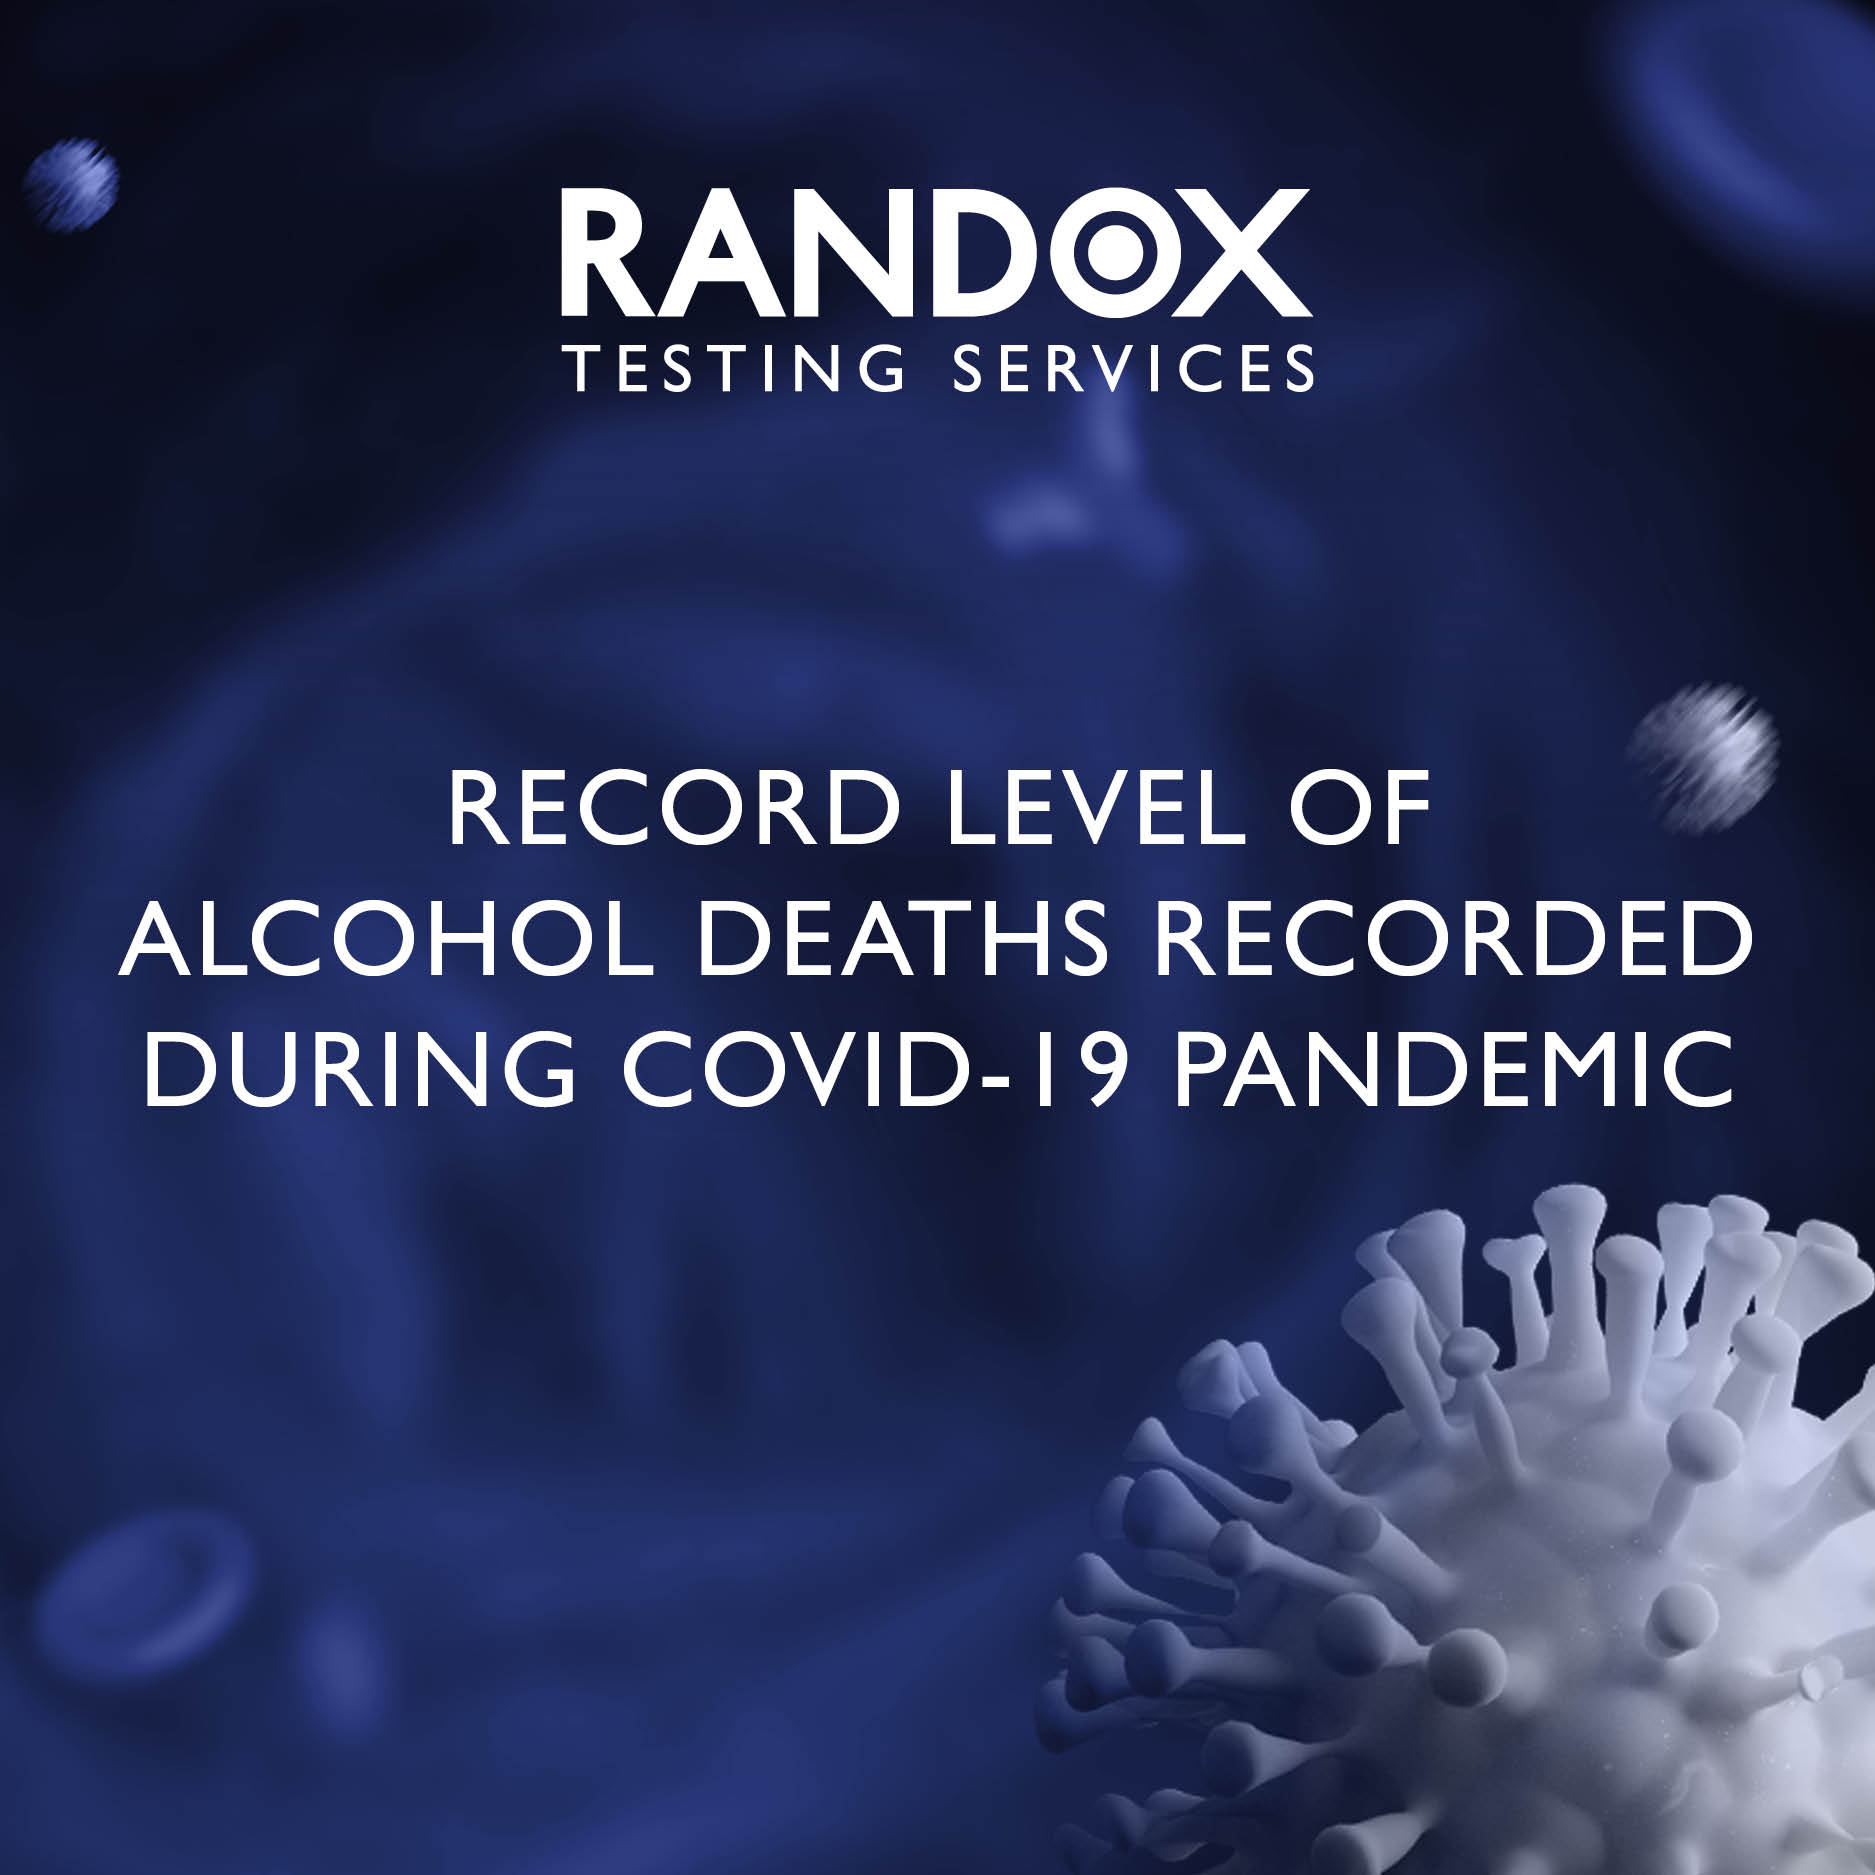 Alcohol deaths during the pandemic